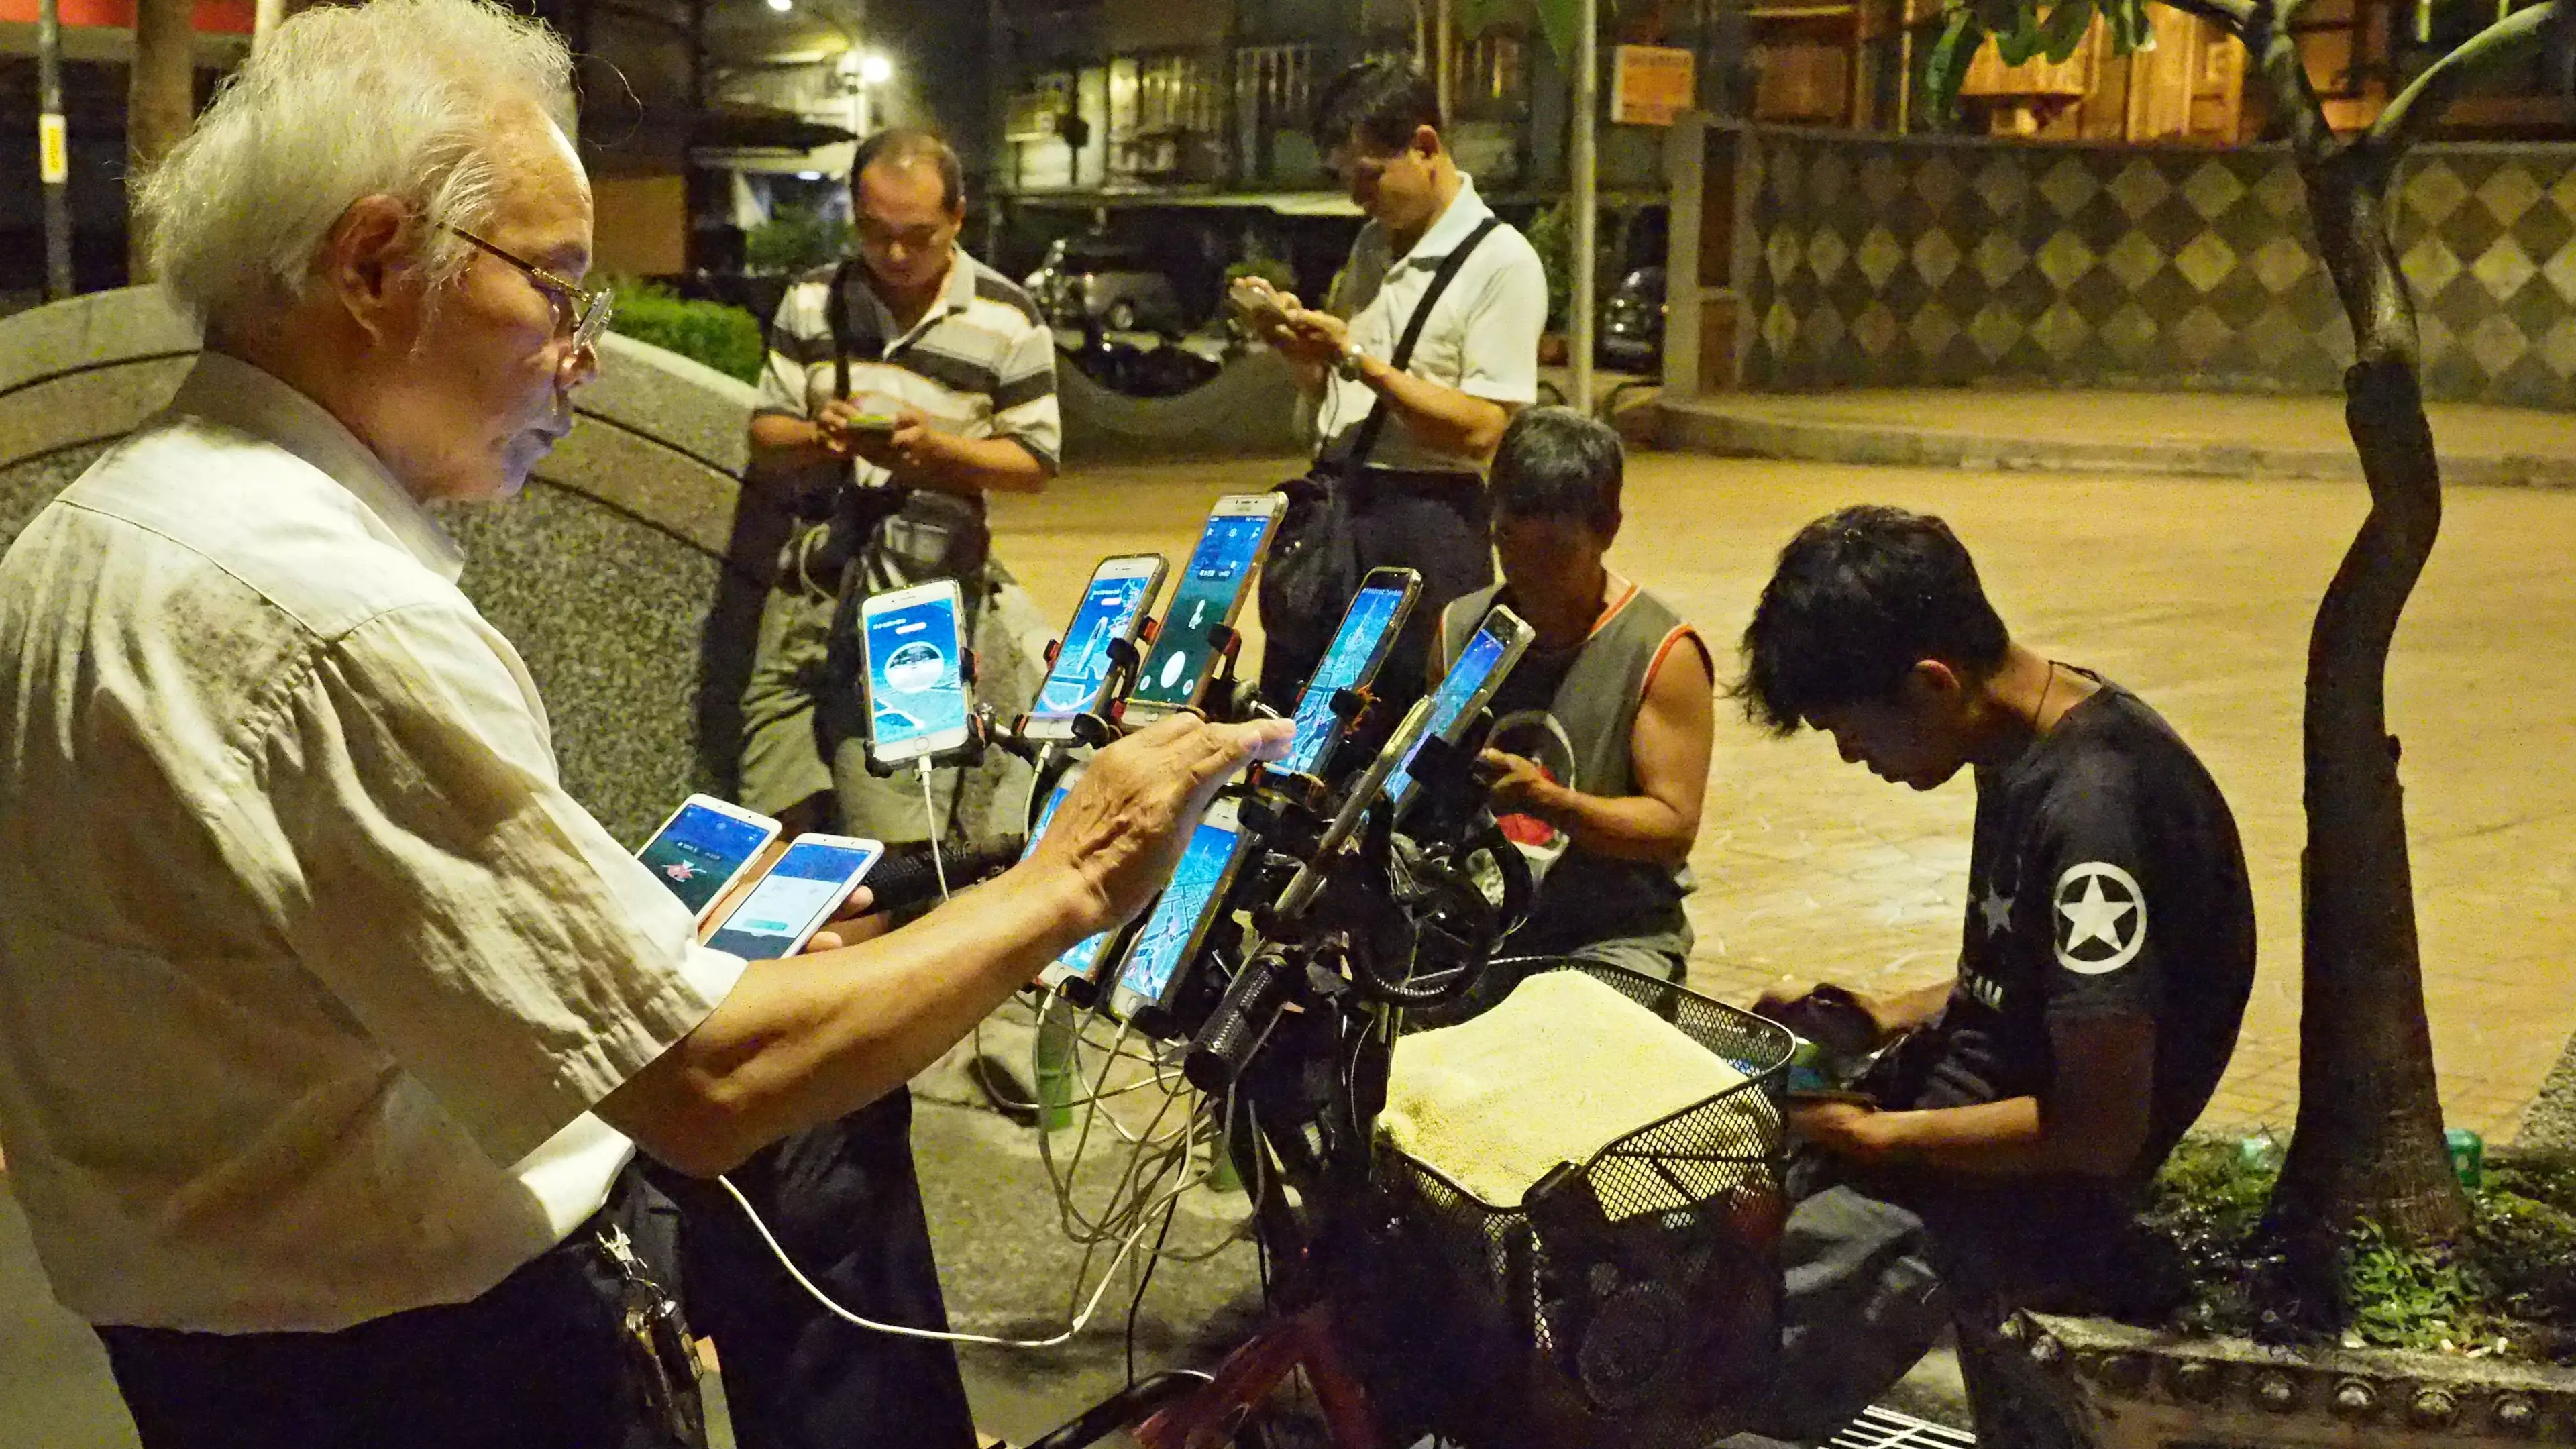 This Pensioner Uses 11 Smartphones Simultaneously To Play 'Pokemon Go' 